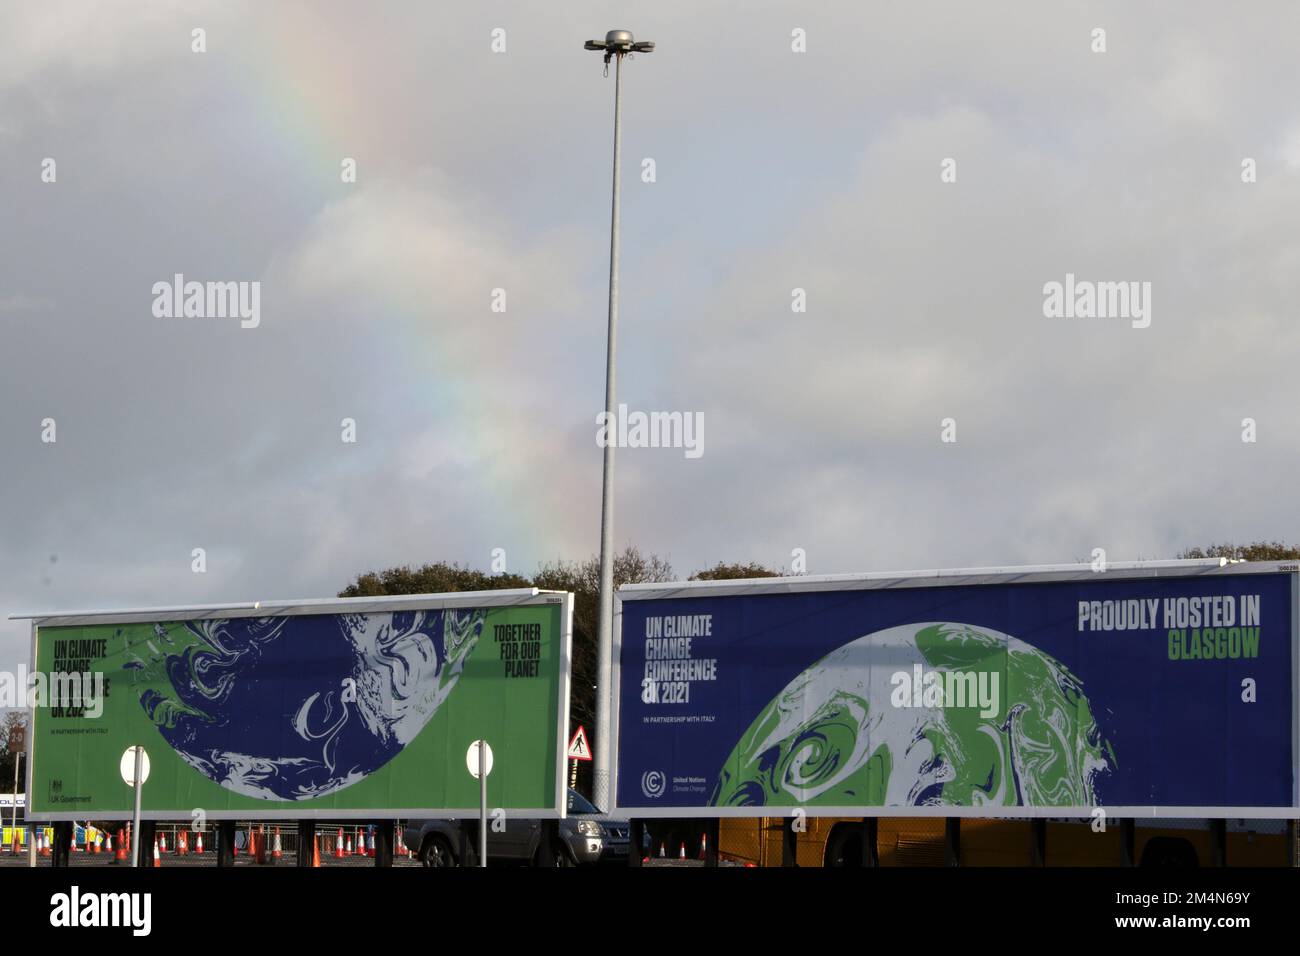 Glasgow Prestwick Airport, Prestwick, Ayrshire, Scotland, UK. Image shows large advertising hoarding promoting the UK Climate Change conference being held in Glasgow 2021. Known as COP 26. Stock Photo